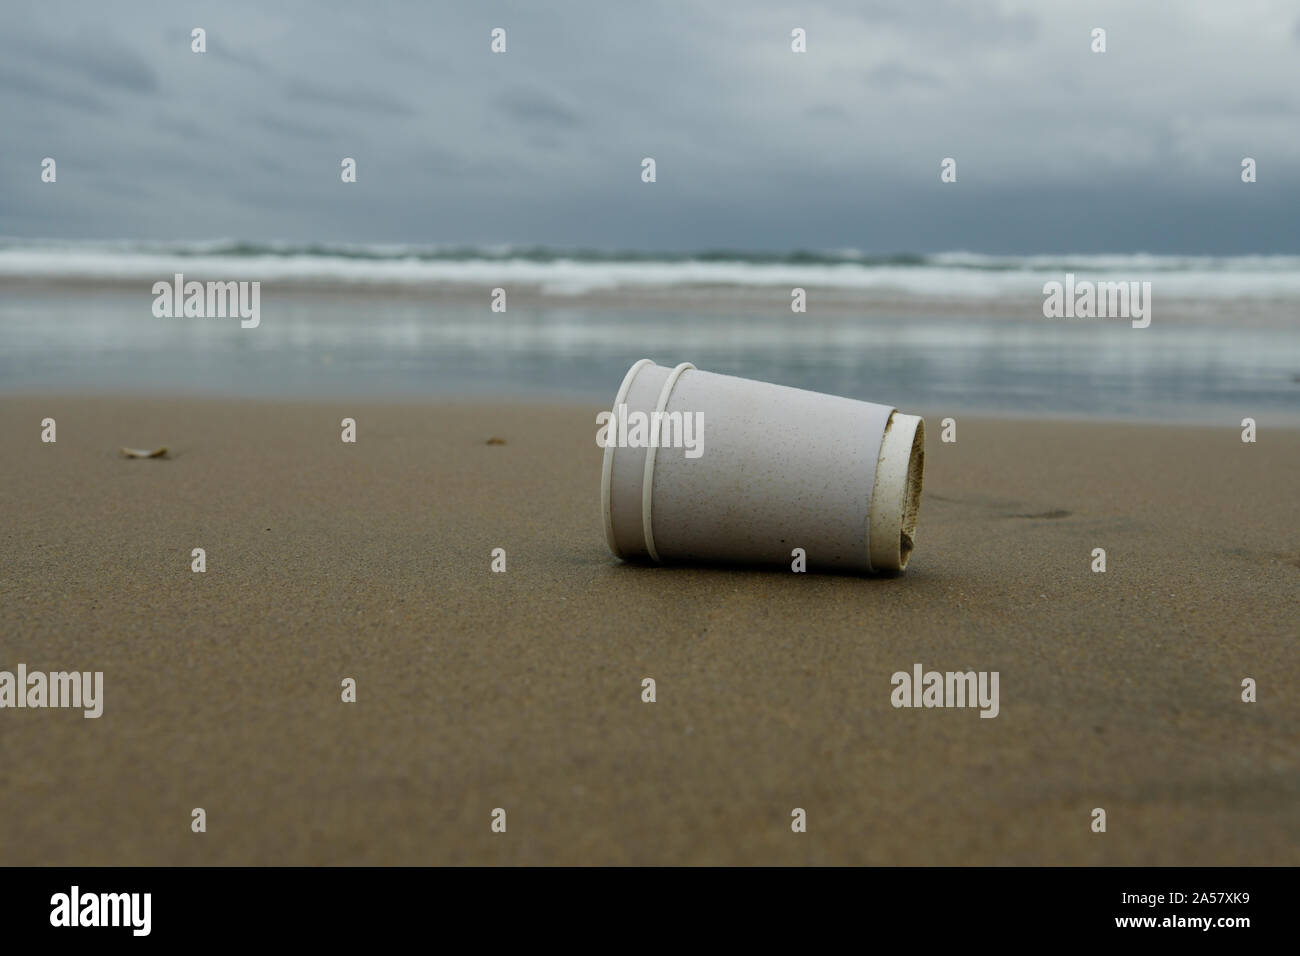 Durban, South Africa, beach pollution, disposable cups lying on sand in tidal zone, food packaging, close up, objects, container, waste Stock Photo